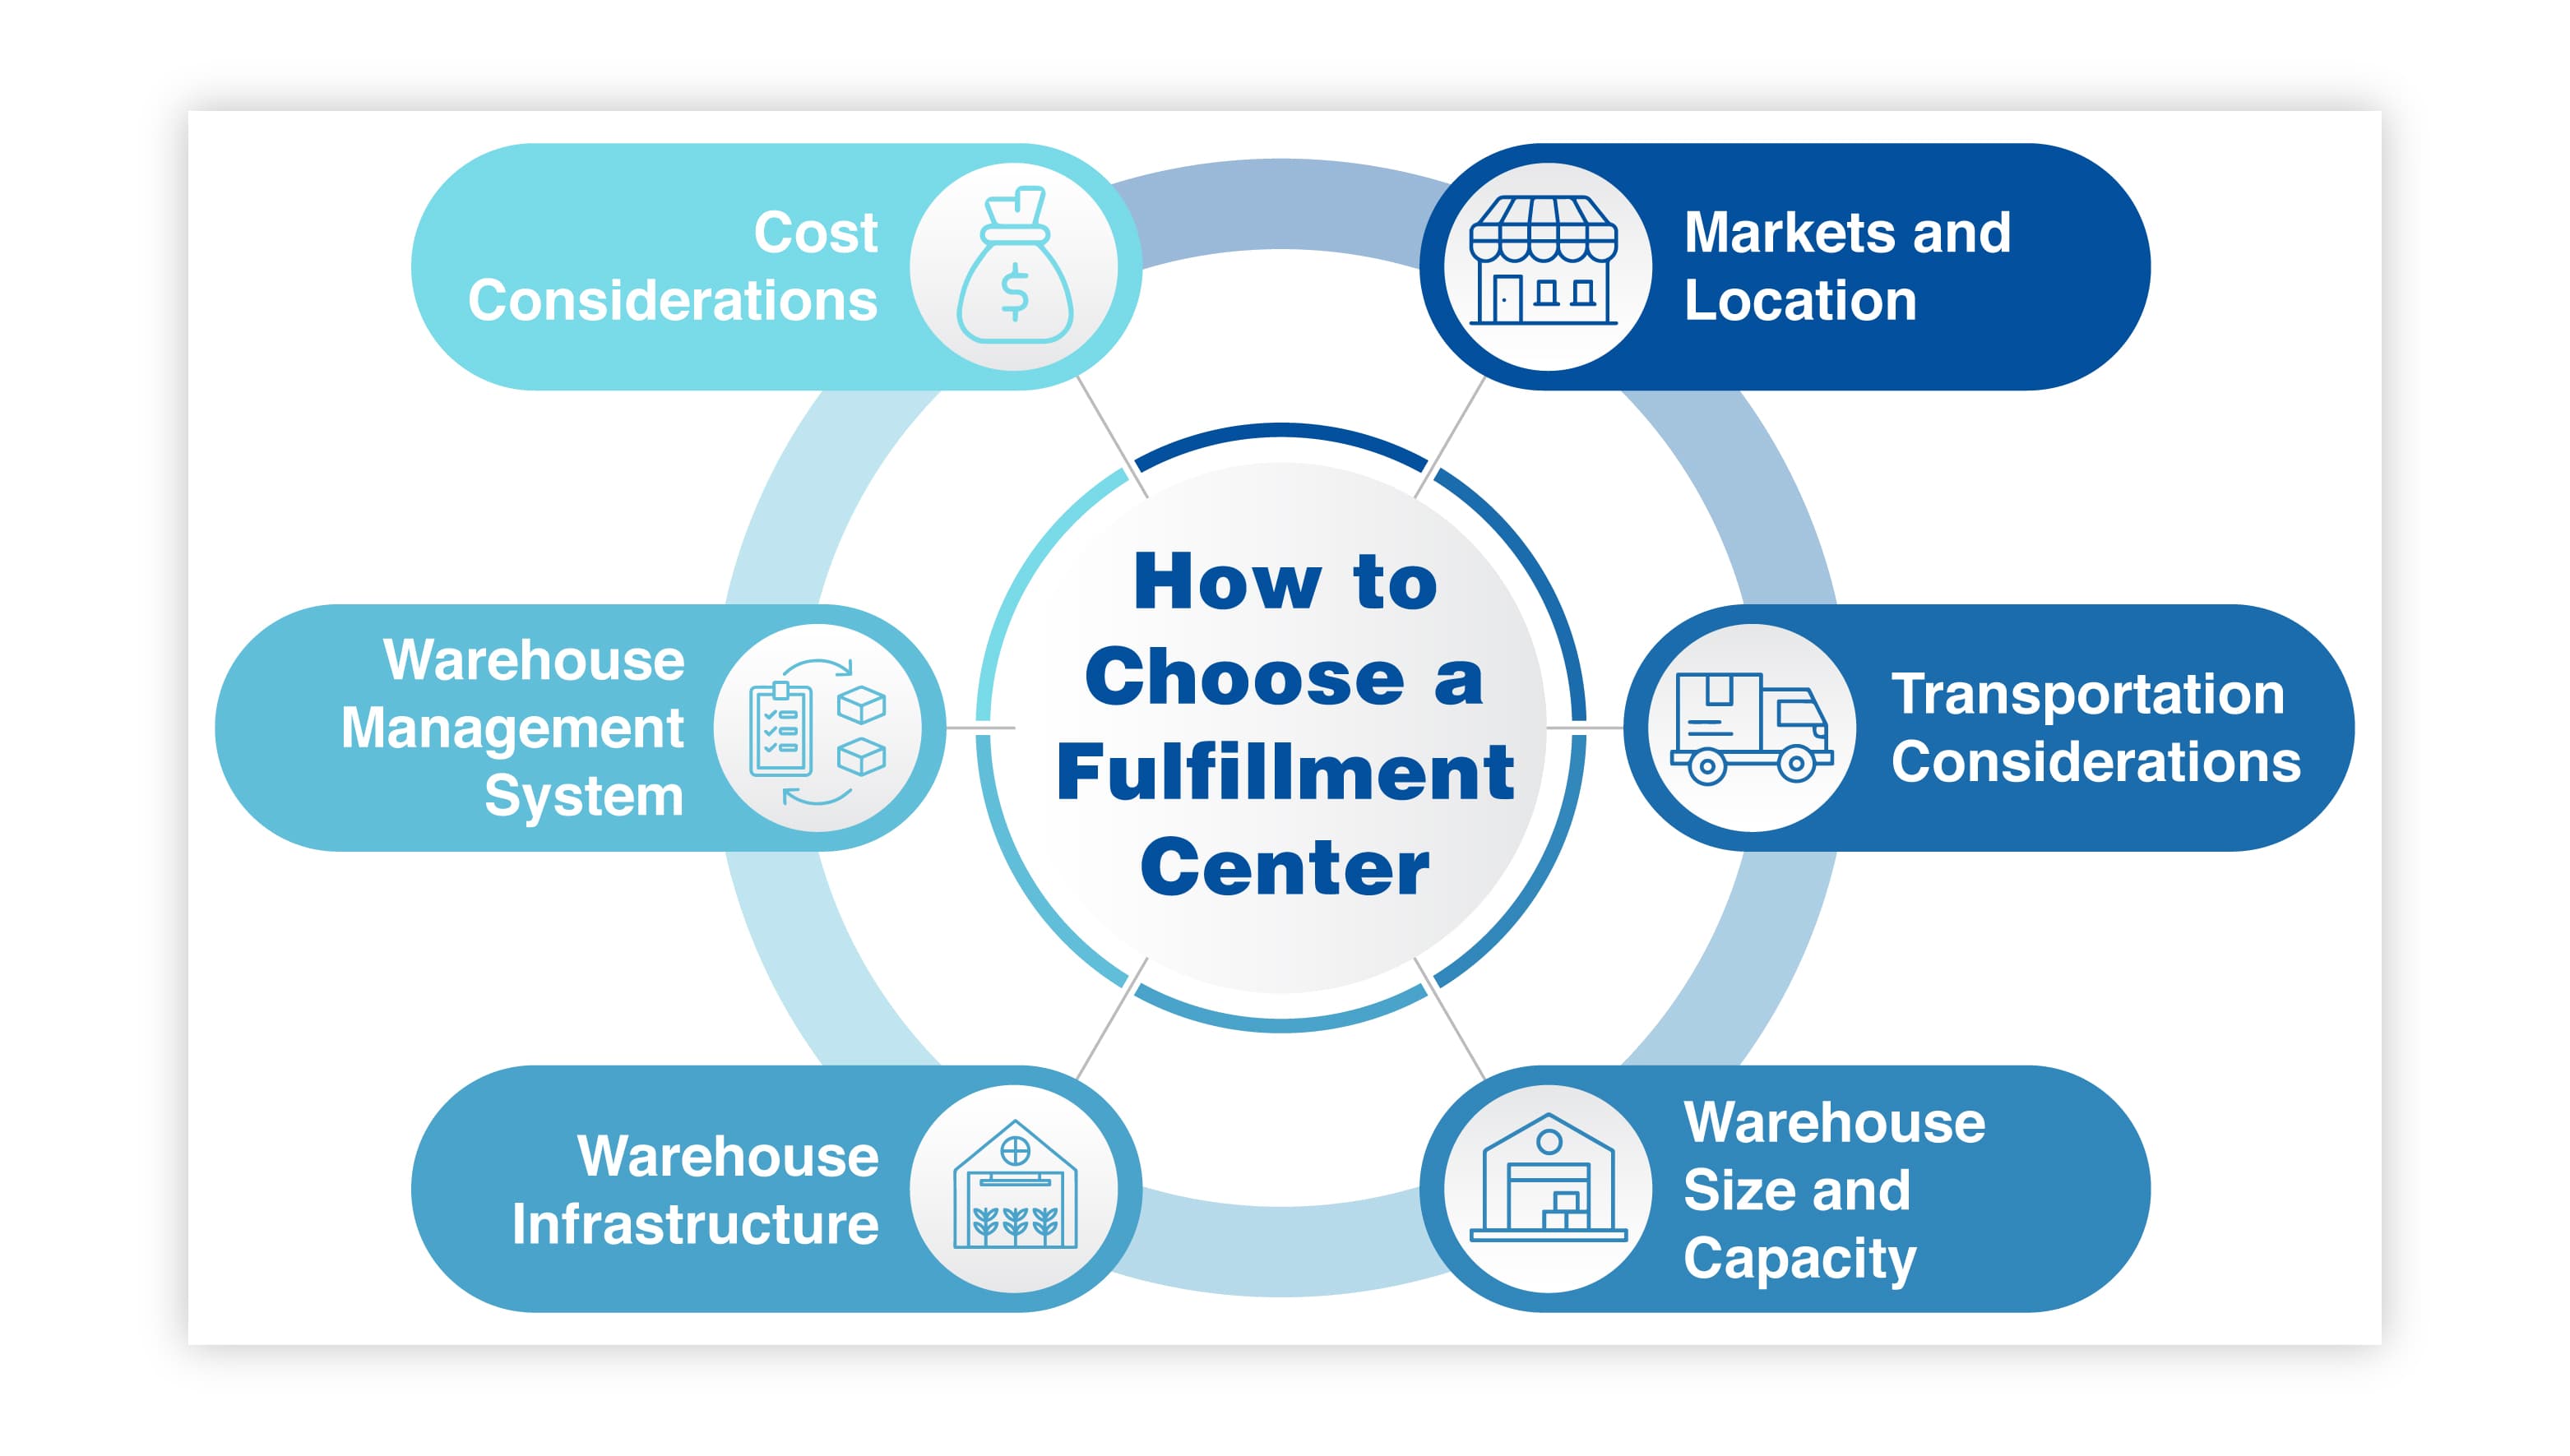 How to Choose a Fulfillment Center